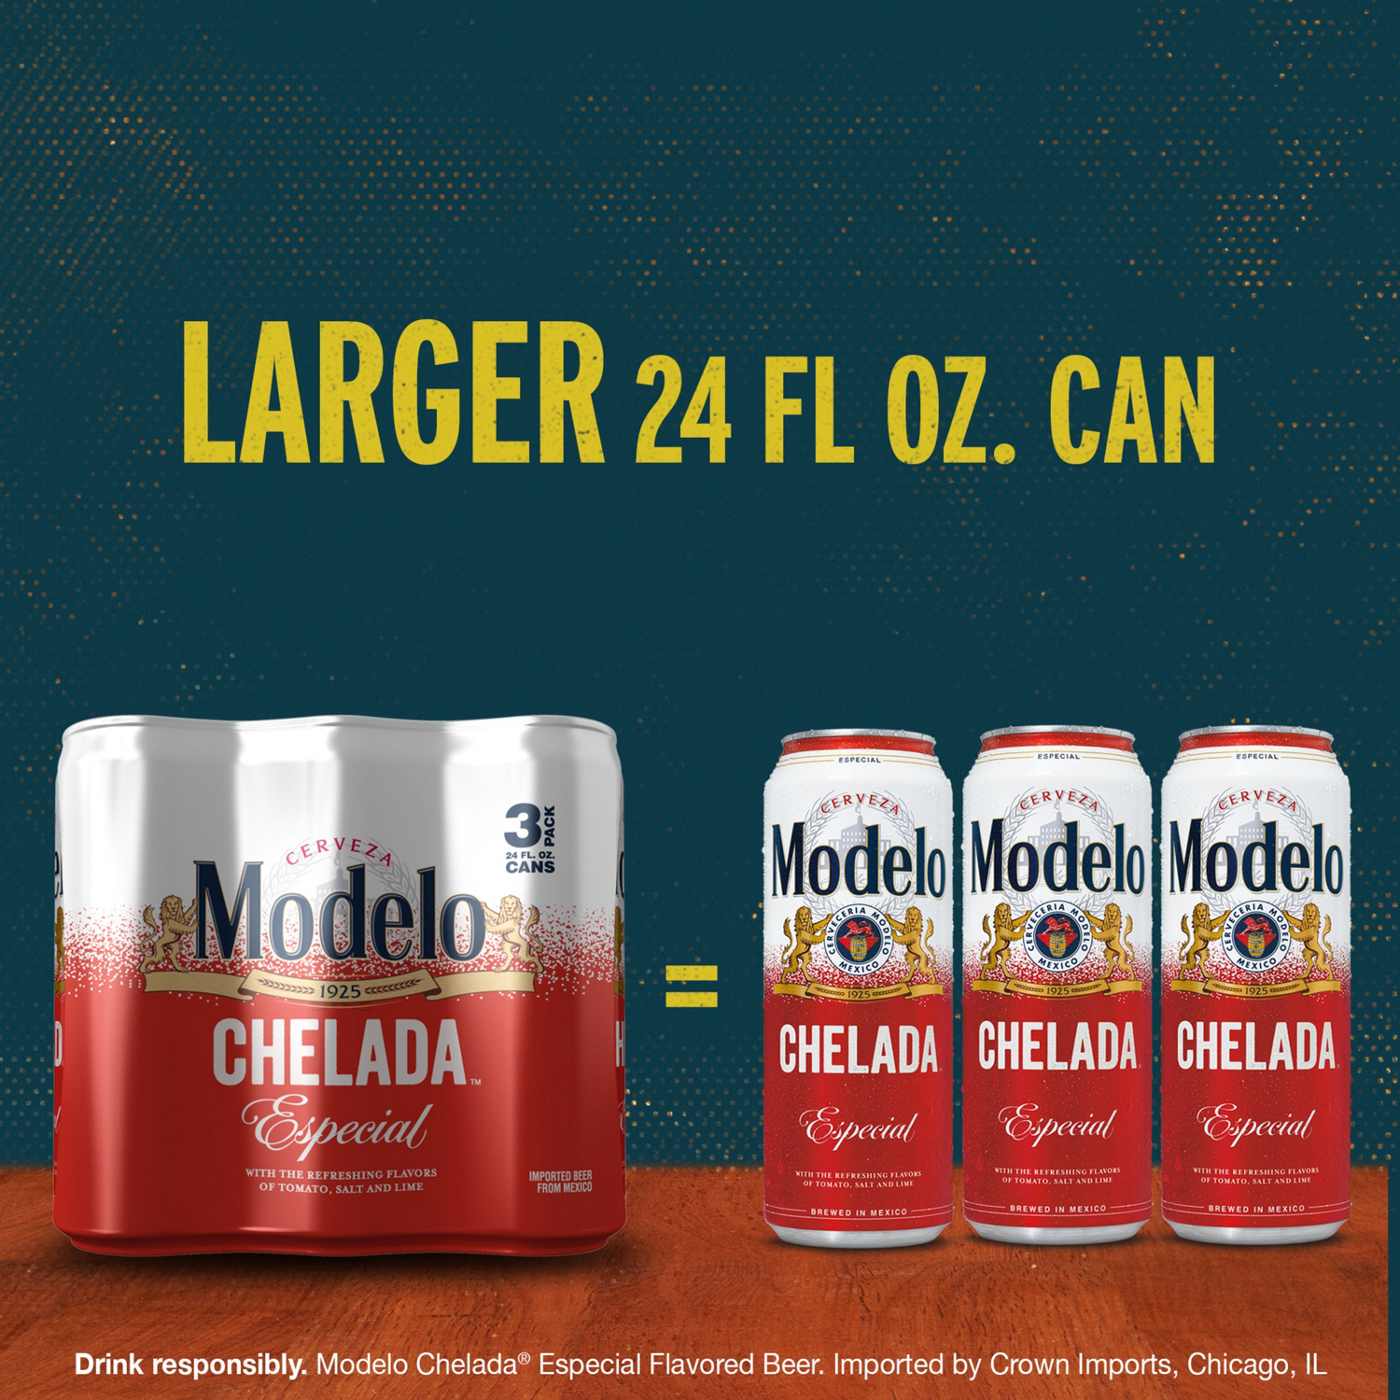 Modelo Chelada Mexican Import Flavored Beer 24 oz Cans, 3 pk; image 6 of 10